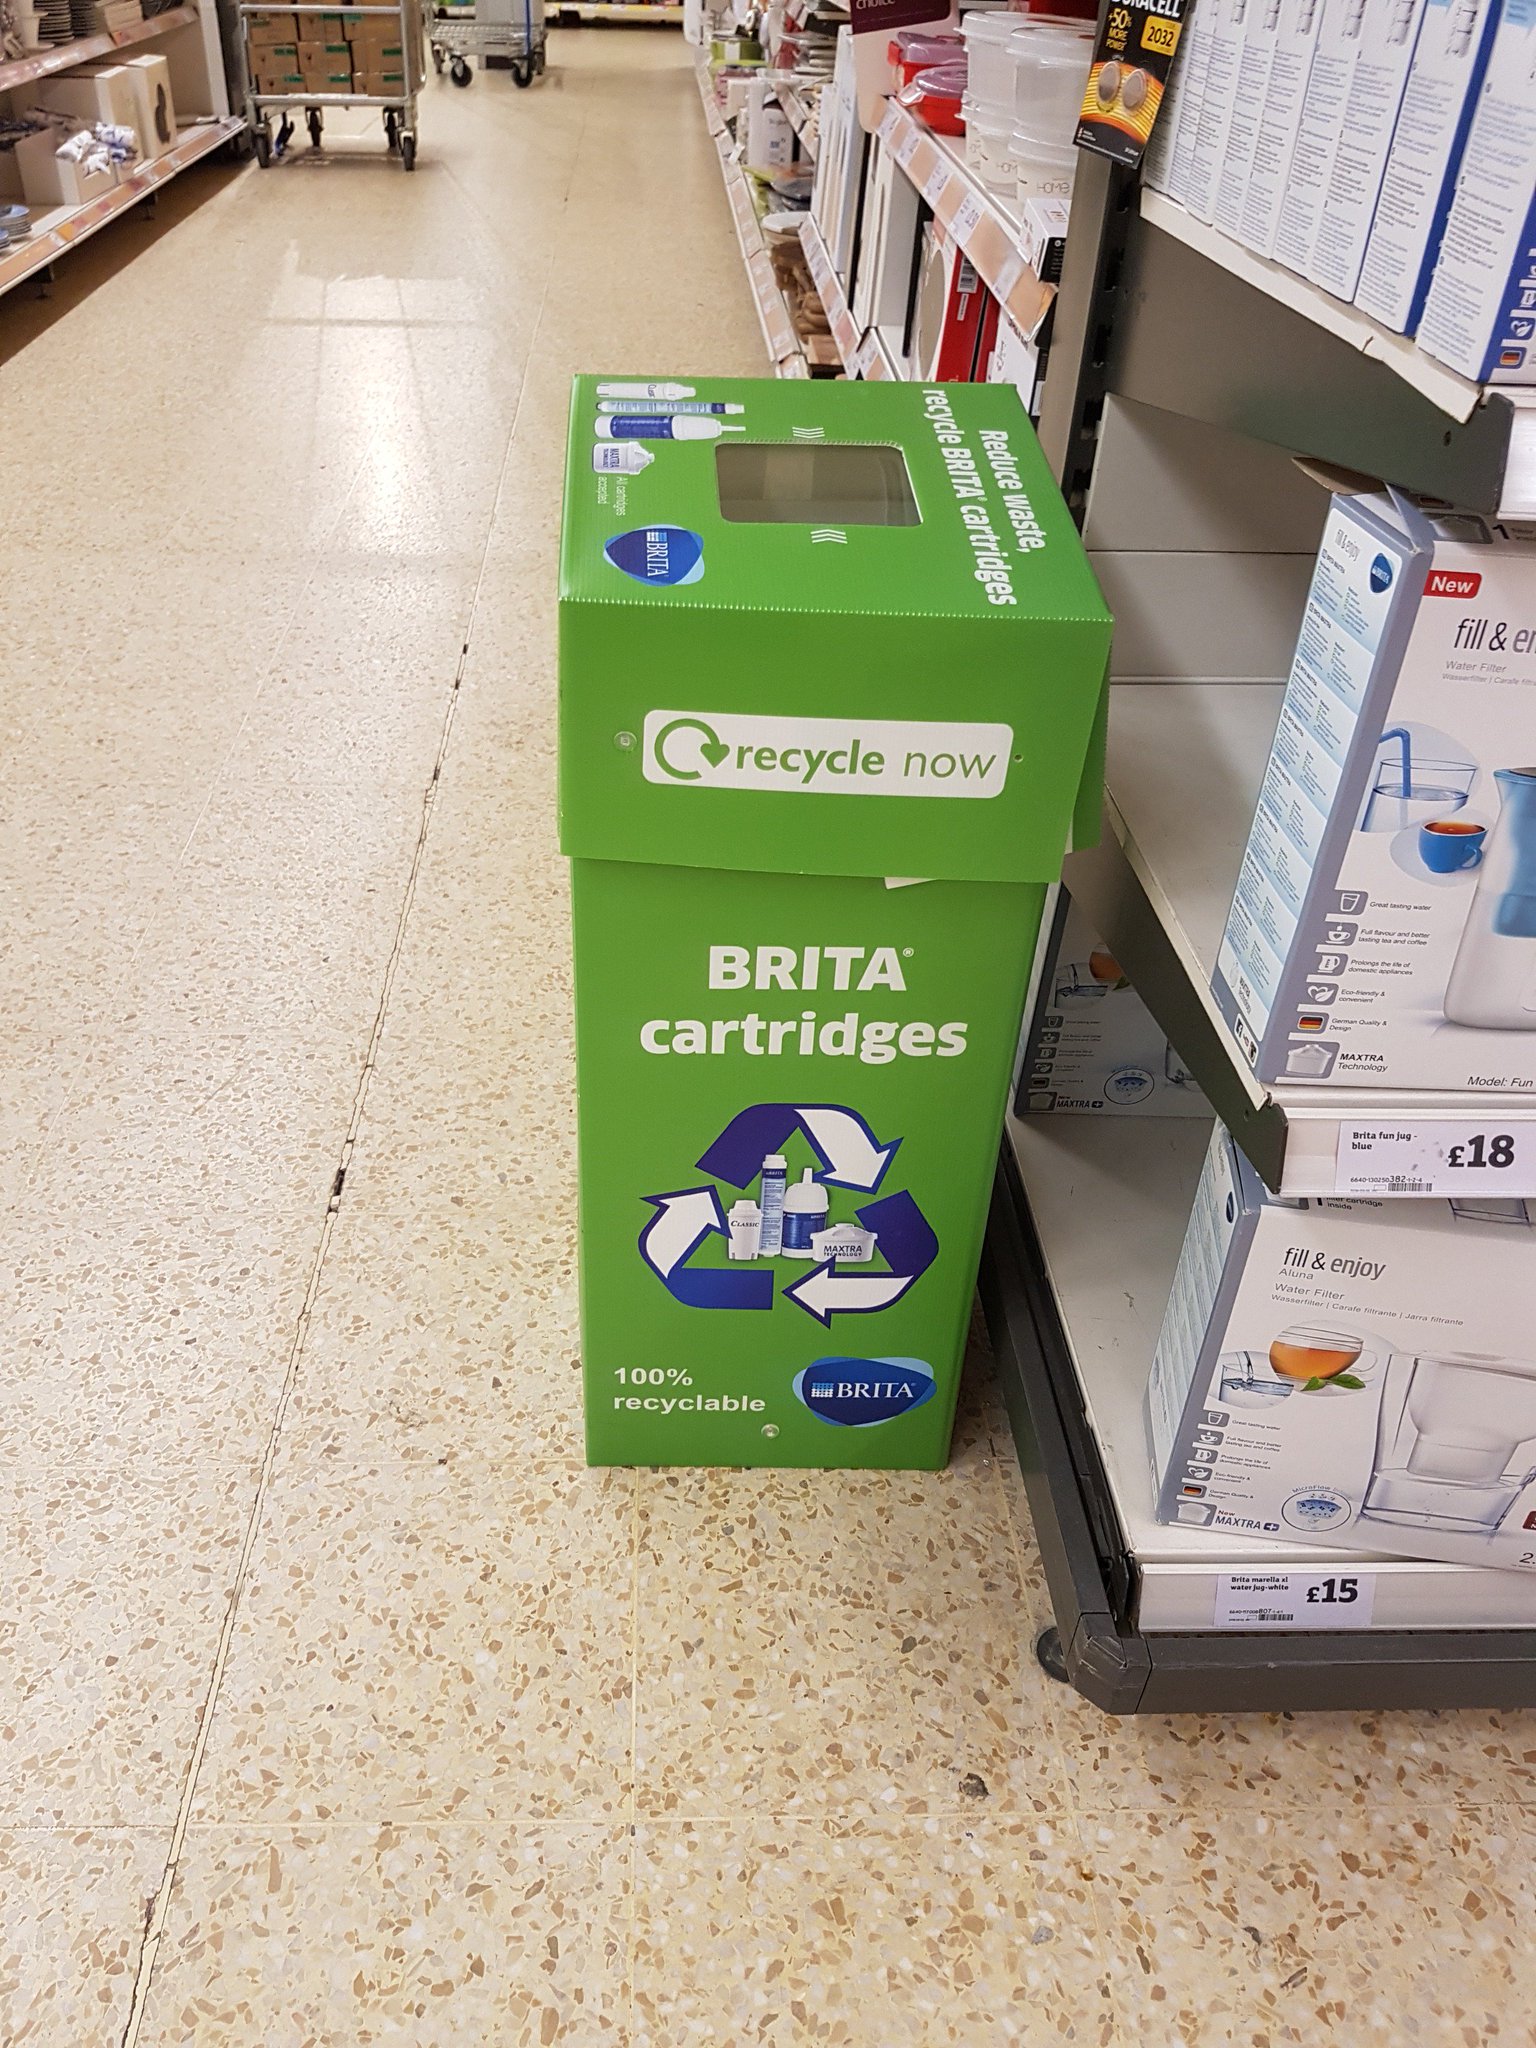 Chelmsford City Council on X: "Looking to #recycle Brita water filter  cartridges in #Chelmsford? There's a recycling point at @sainsburys in  Springfield! #ReduceReuseRecycle https://t.co/yhKGlChkef" / X